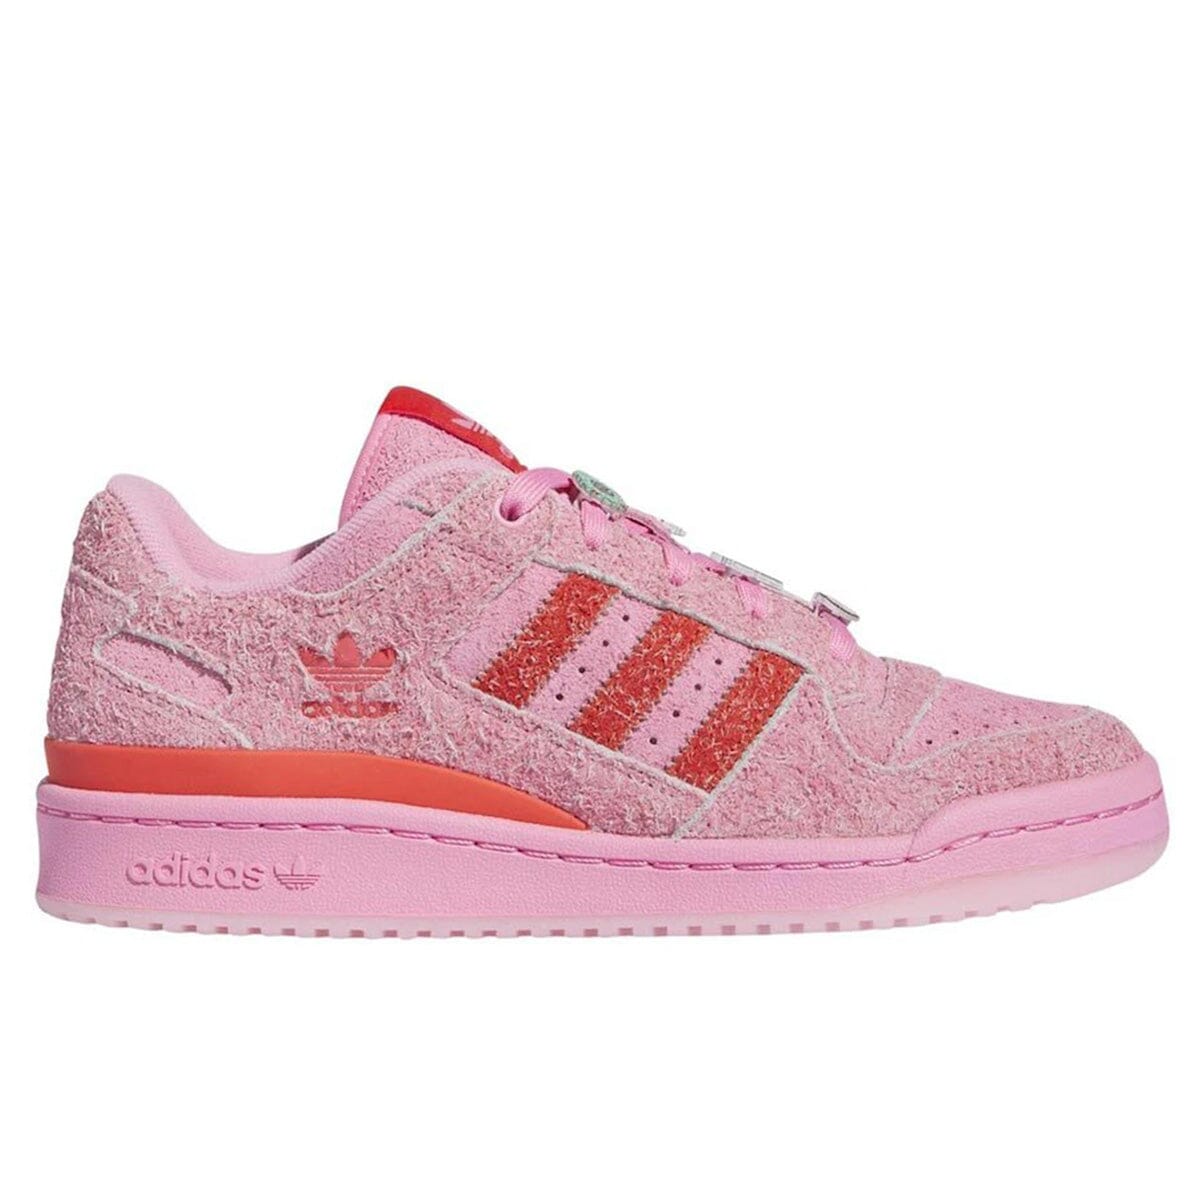 Adidas Forum Low The Grinch Cindy-Lou Who Pink Adidas Forum Blizz Sneakers 